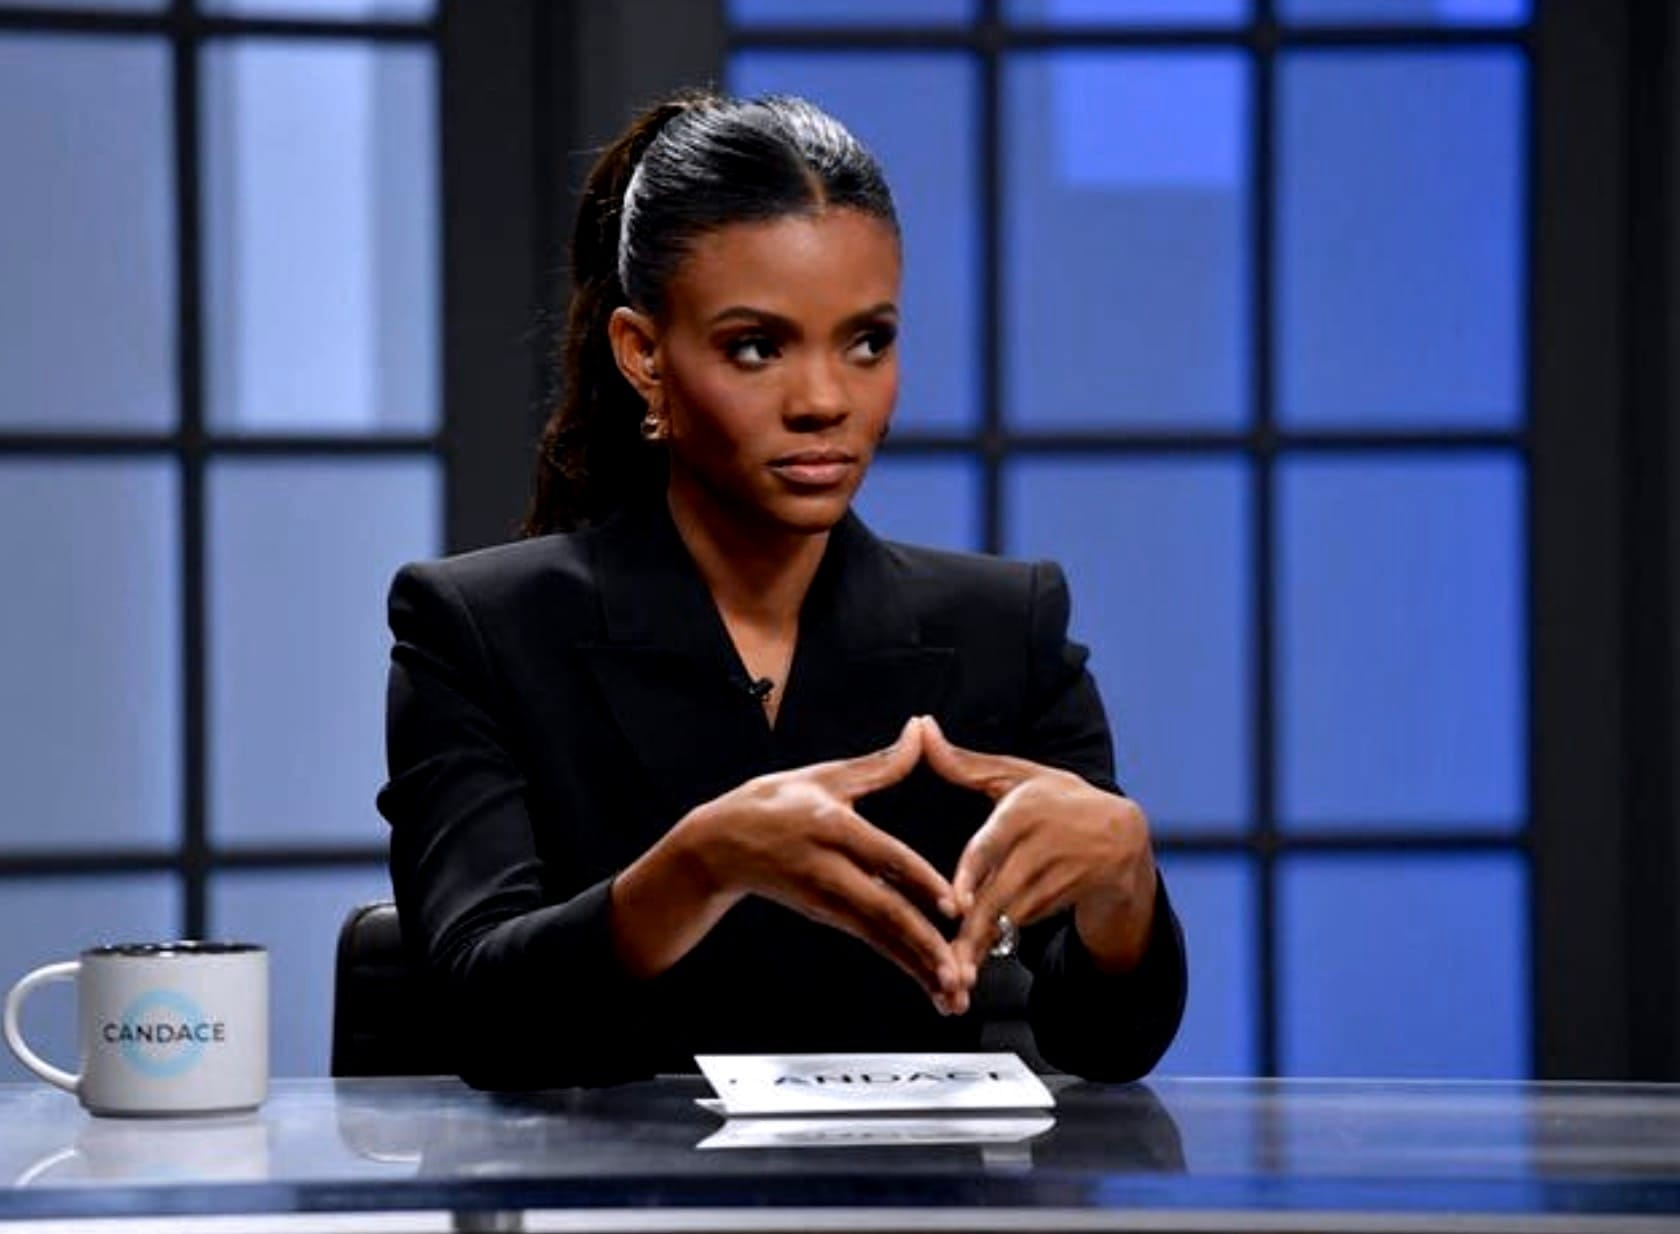 Daily Wire and Candace Owens Part Ways After Contentious Public Statements